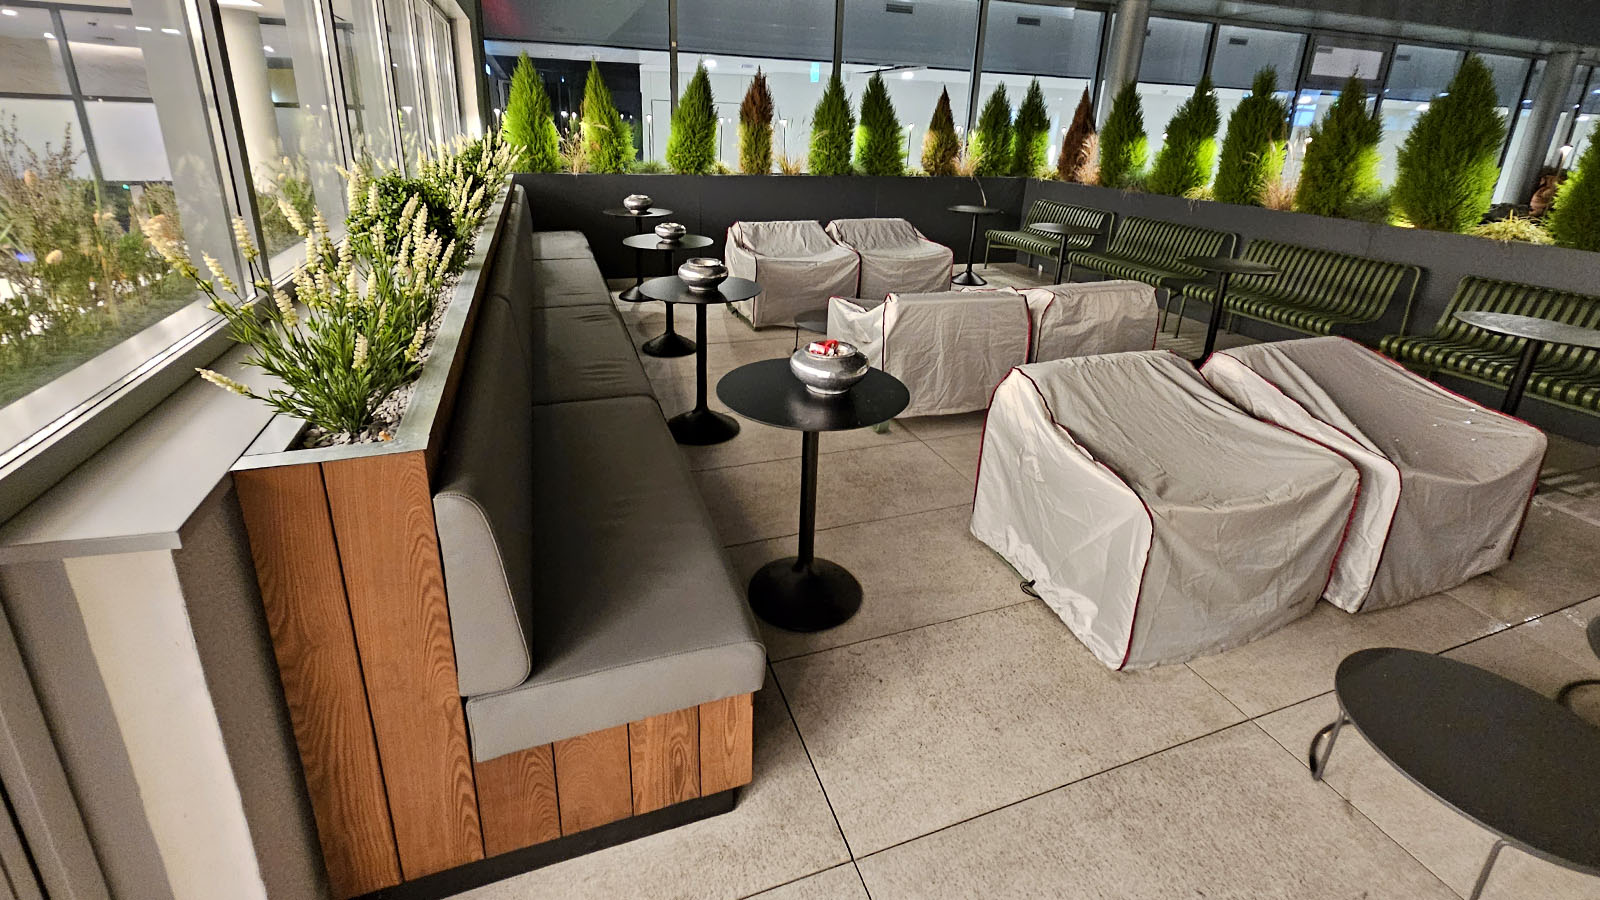 Outside area at the Star Alliance Lounge, Paris